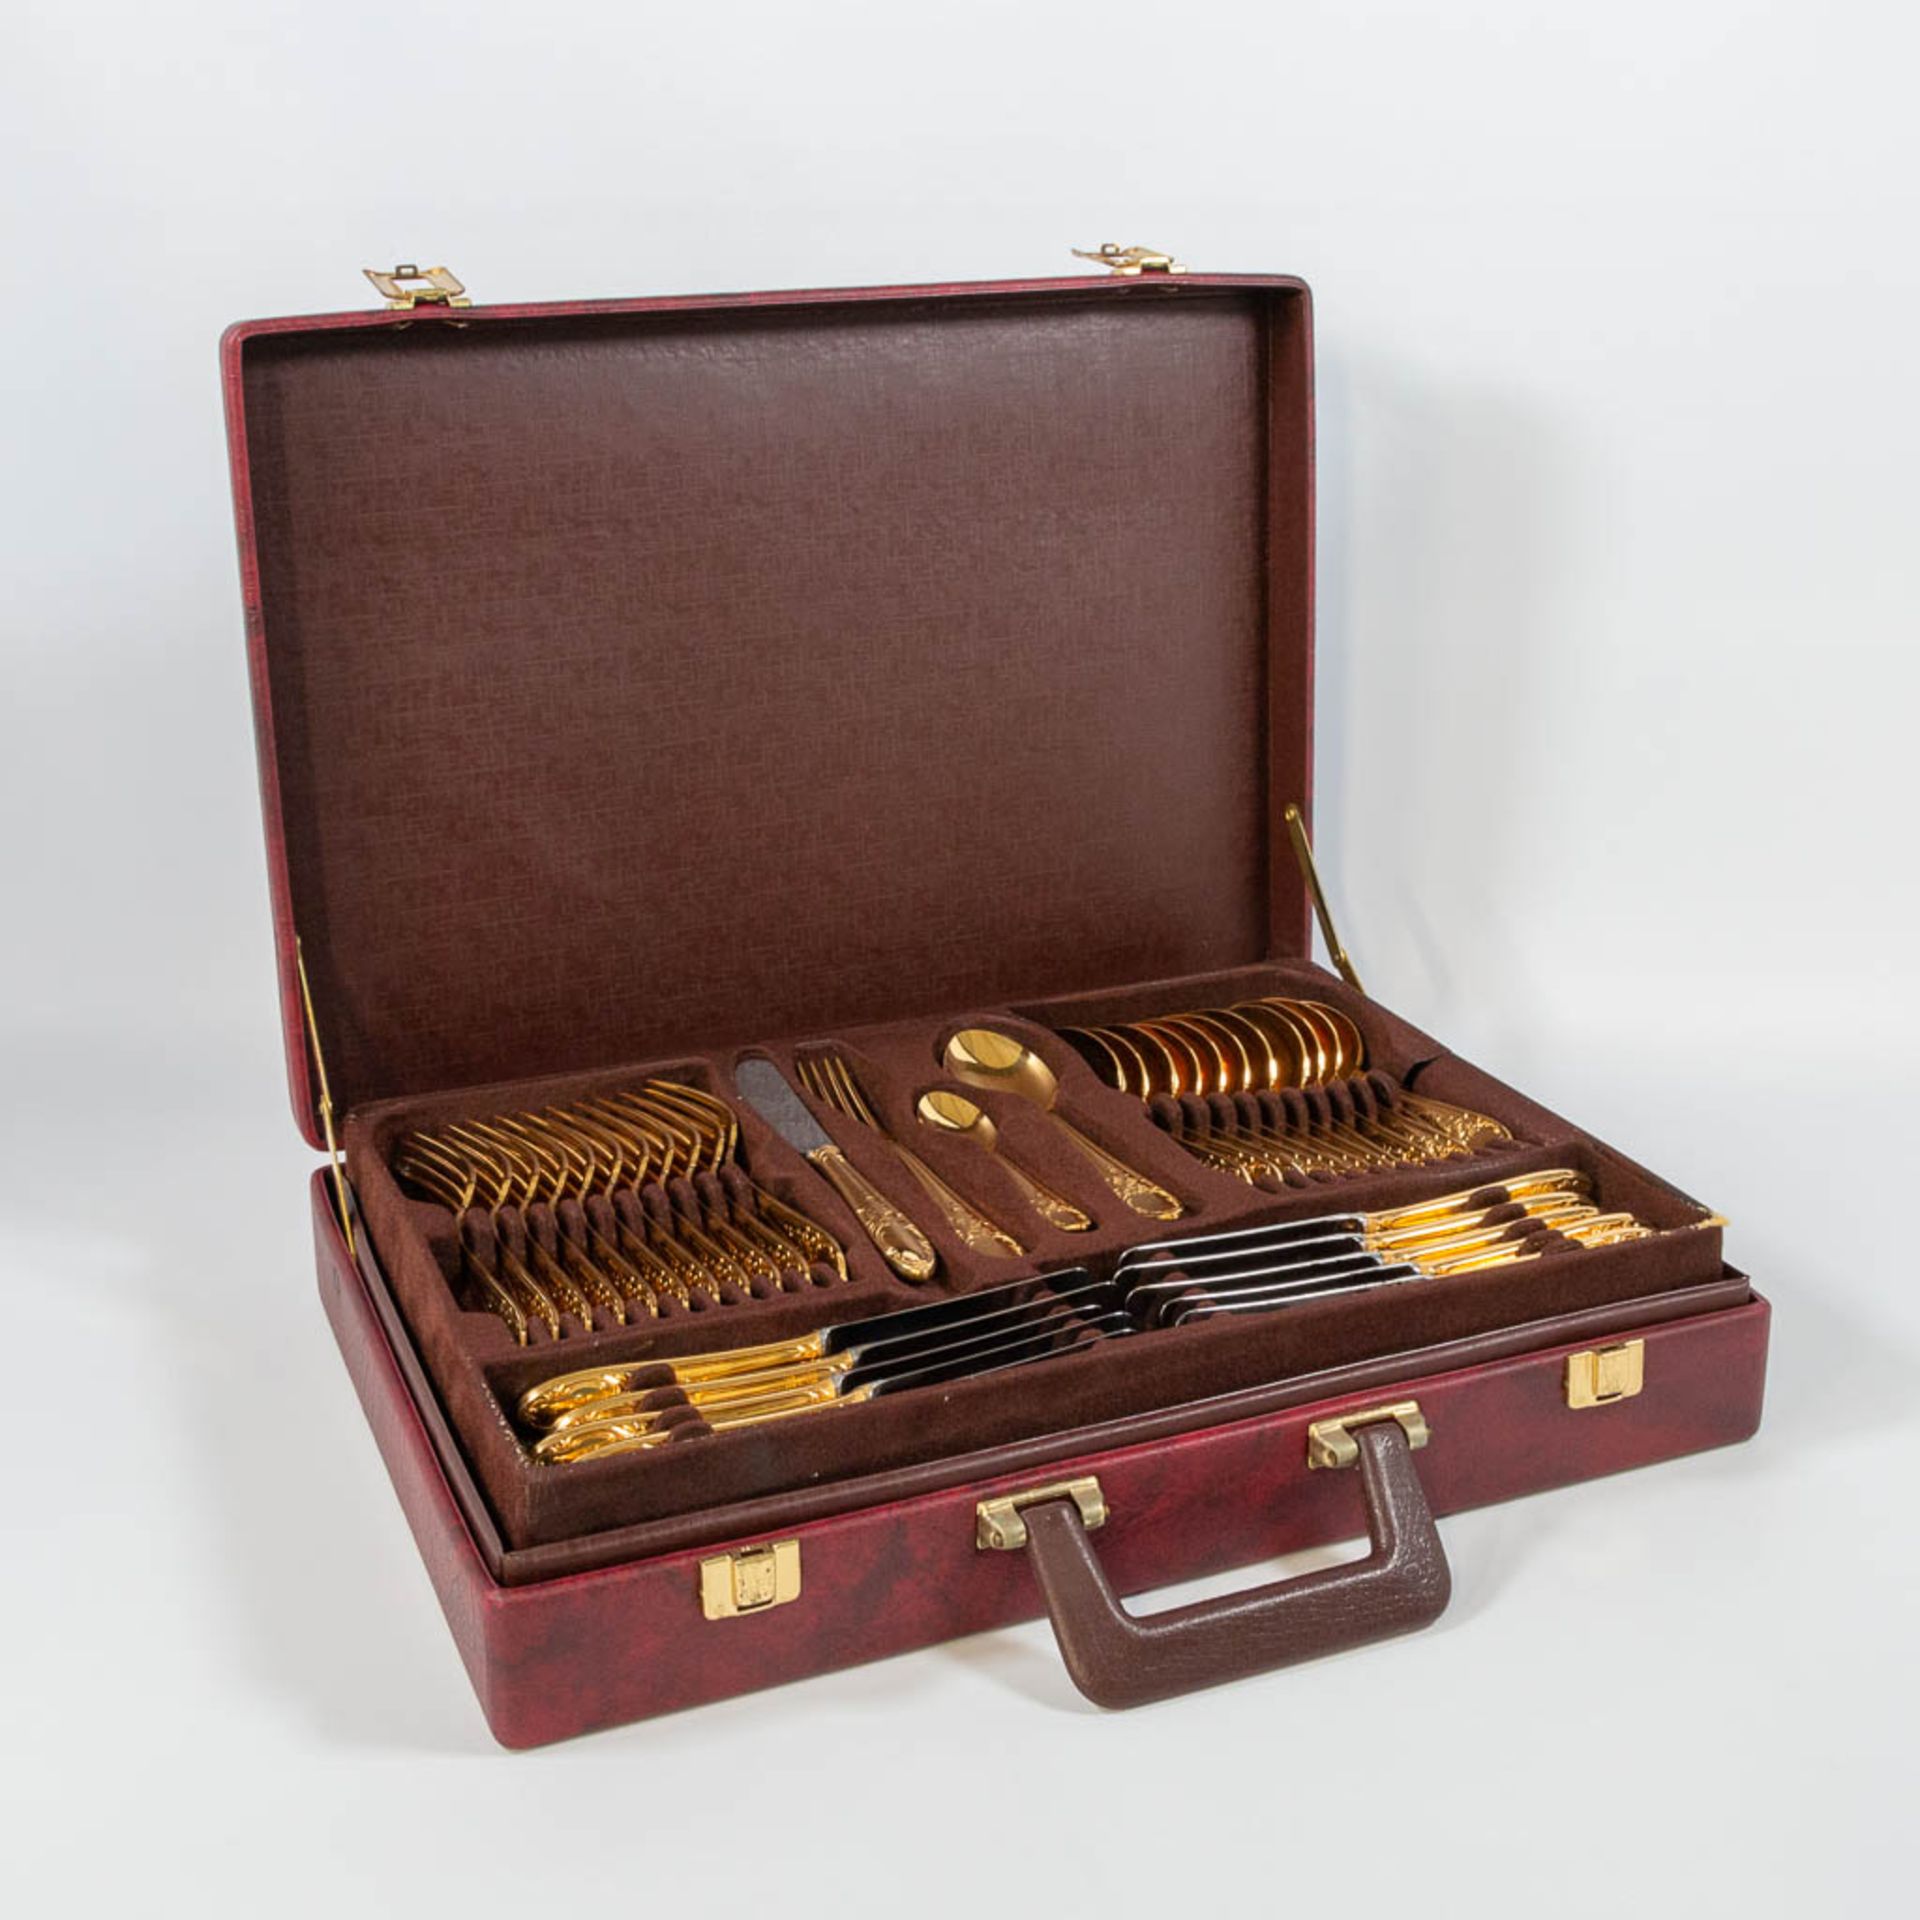 A gold-plated cuttlery set, made by Solingen in Germany. Inox 18/10 gold-plated 23 karat. - Bild 12 aus 23